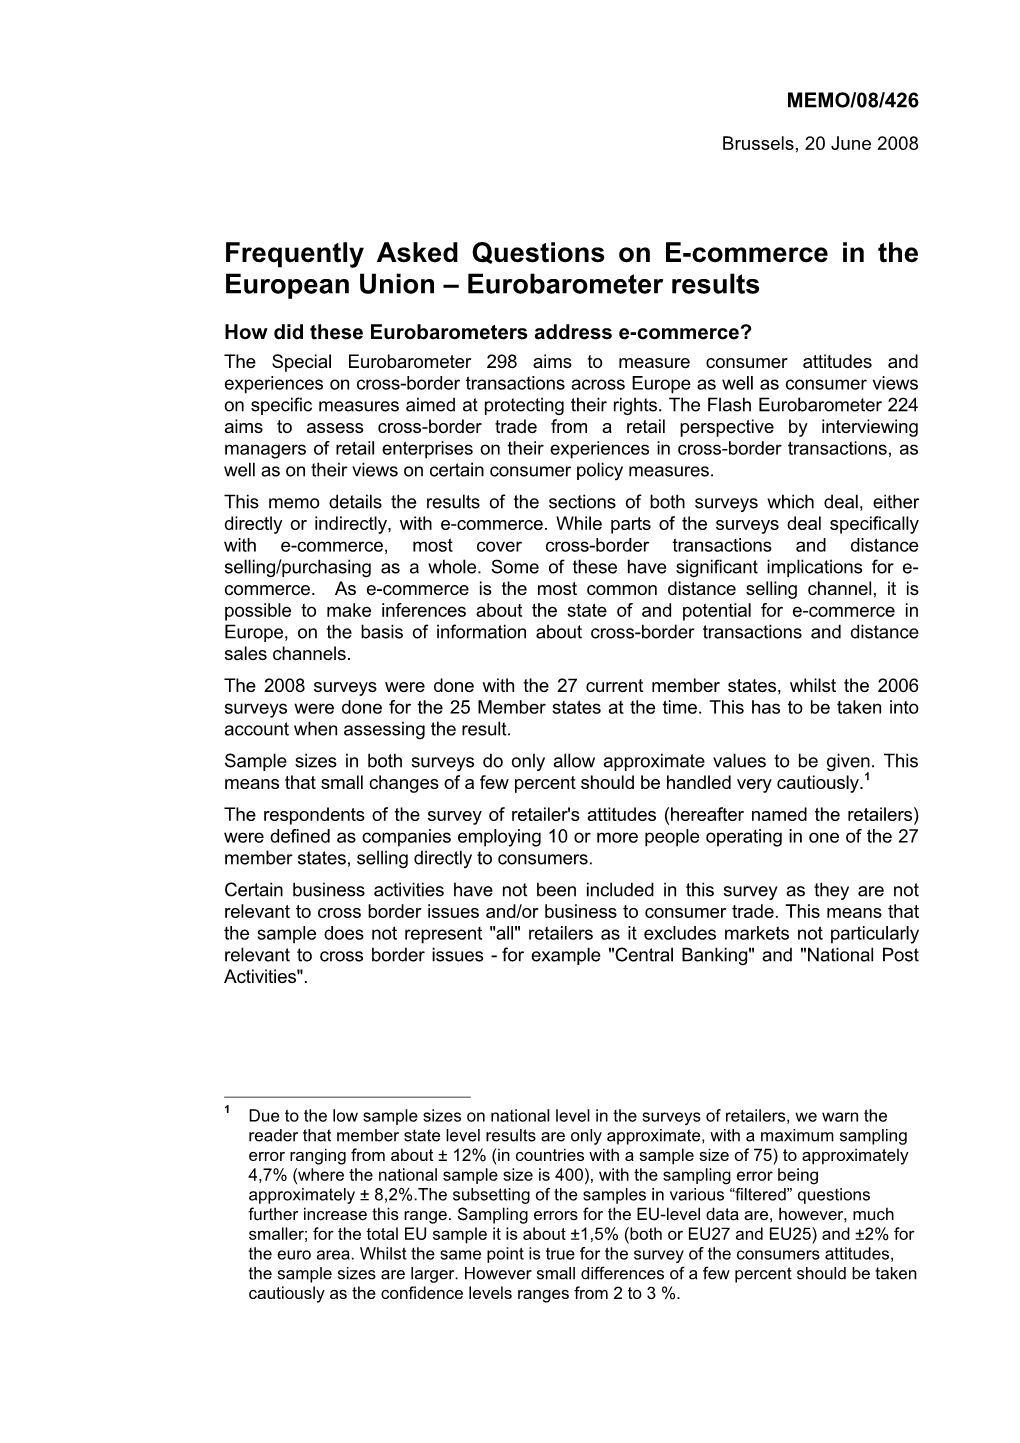 Frequently Asked Questions on E-Commerce in the European Union – Eurobarometer Results